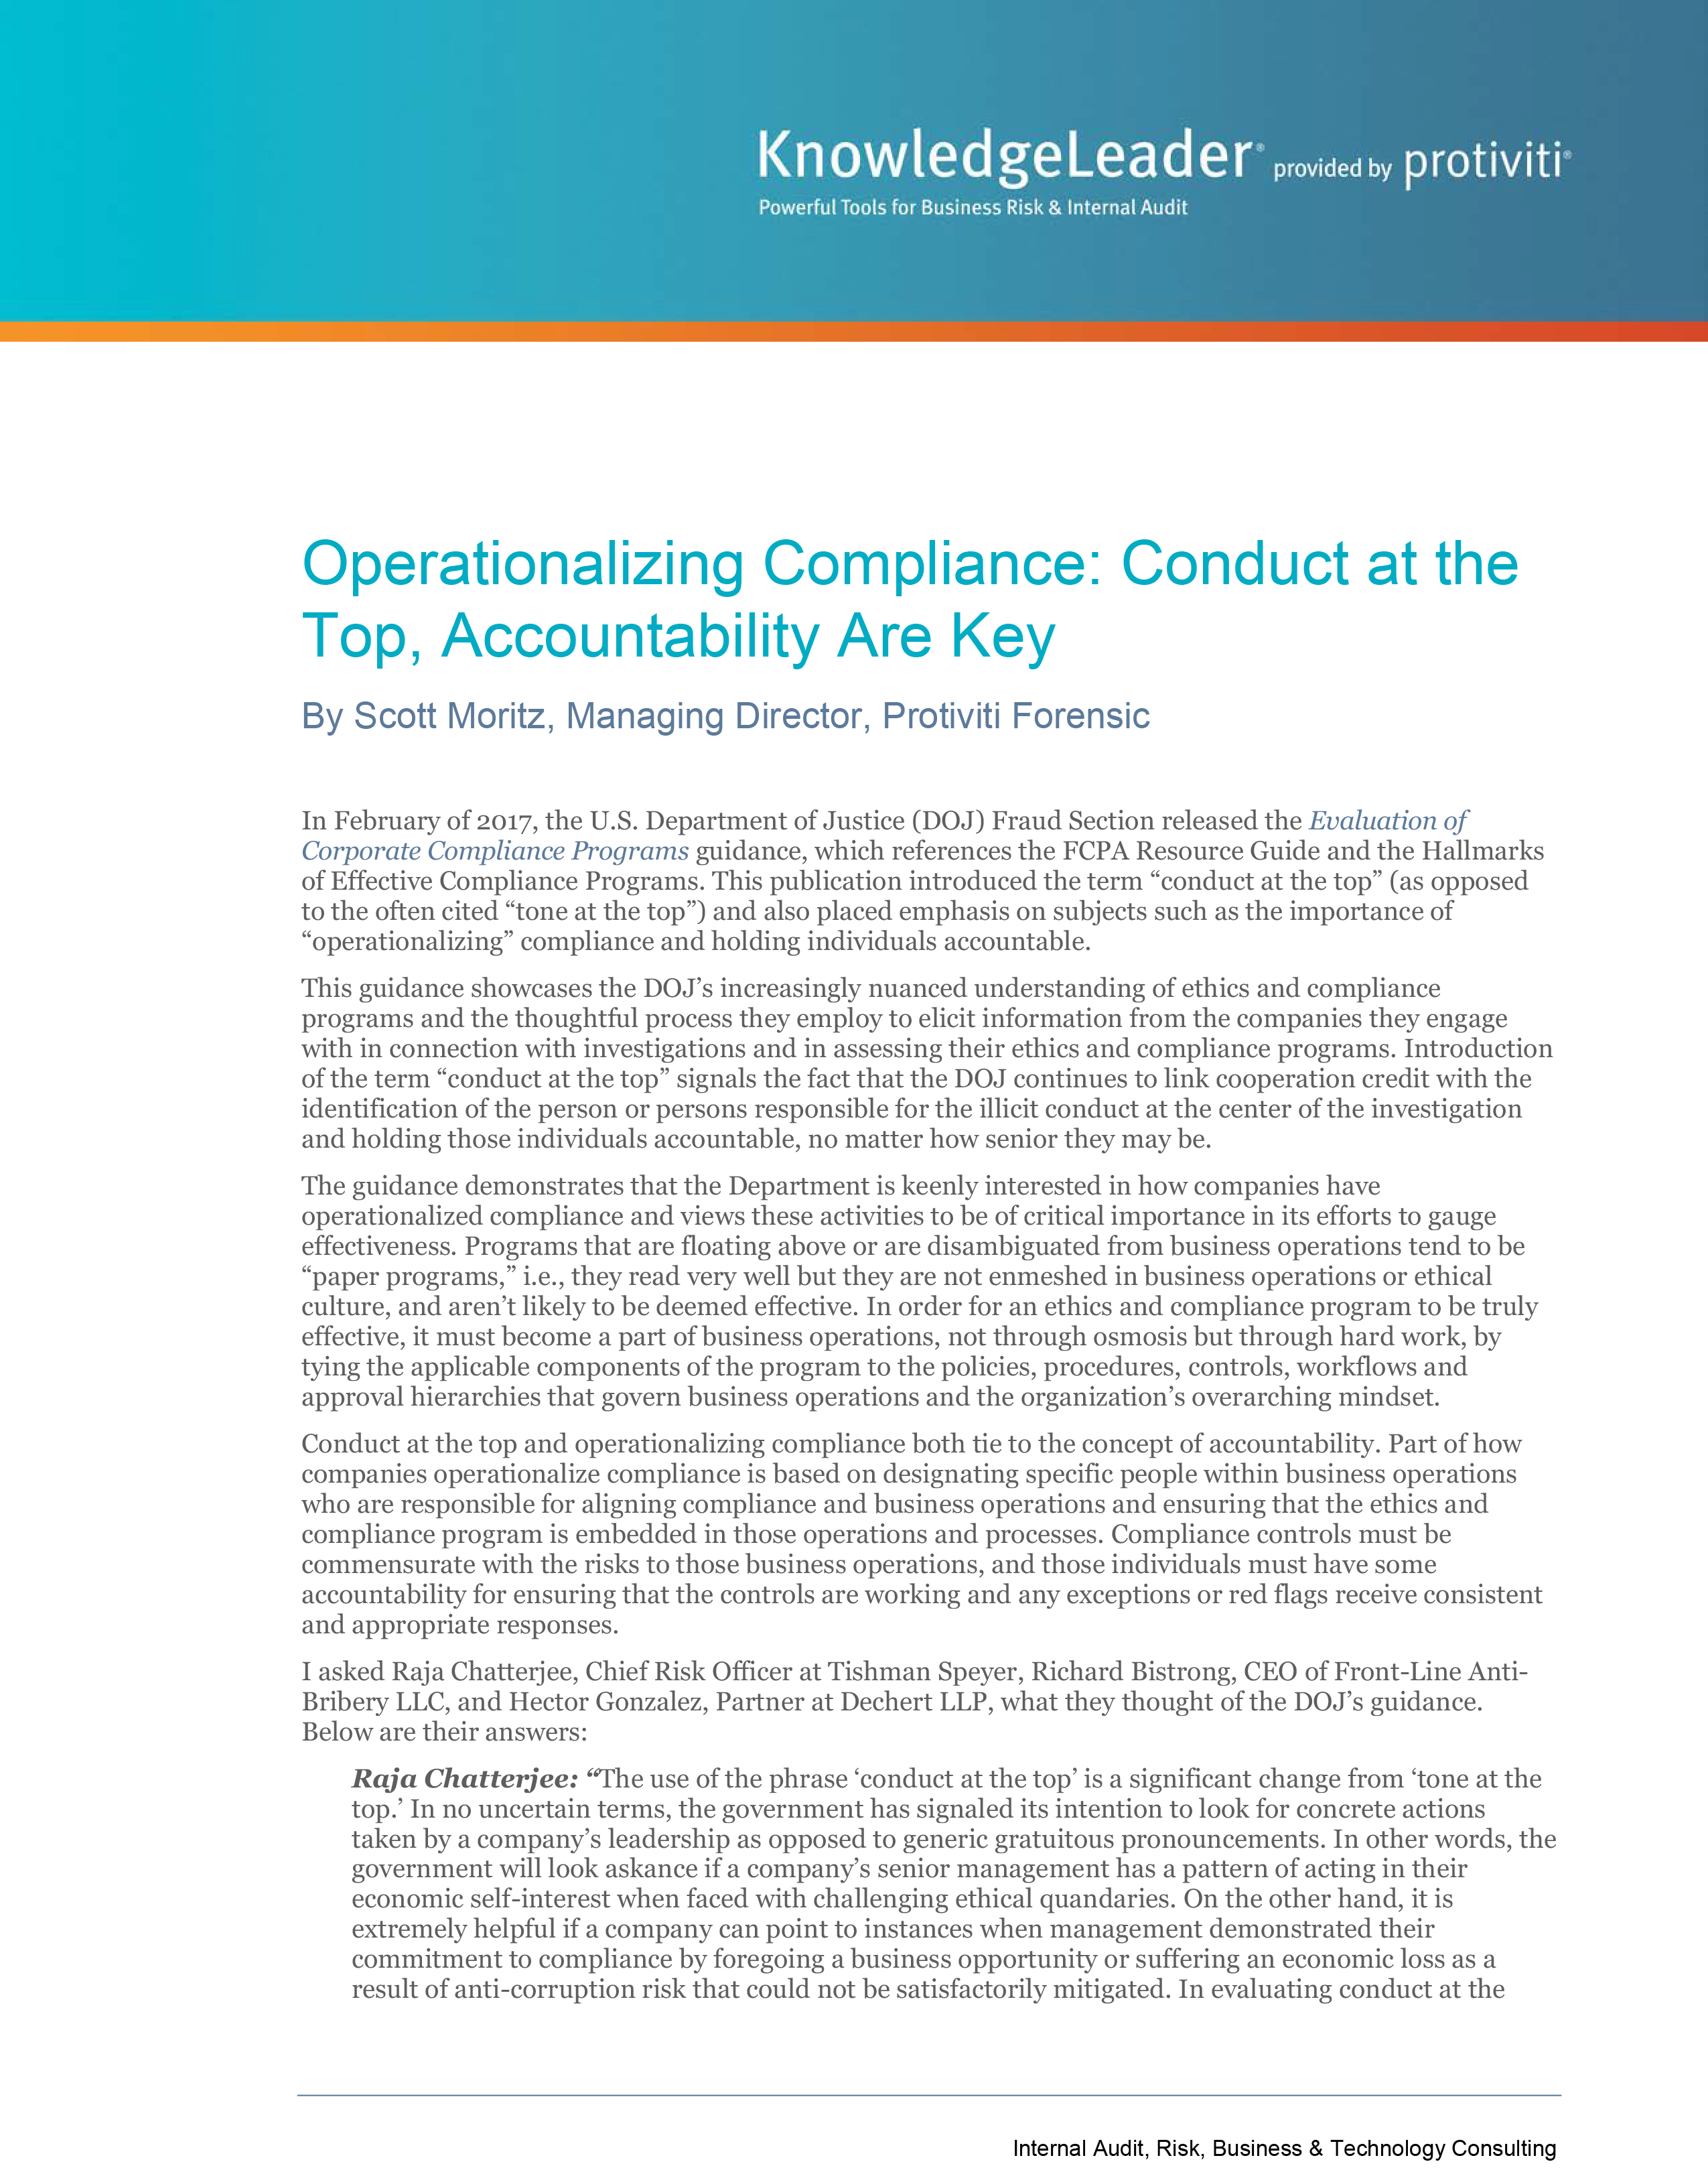 Screenshot of the first page of Operationalizing Compliance-Conduct at the Top, Accountability Are Key